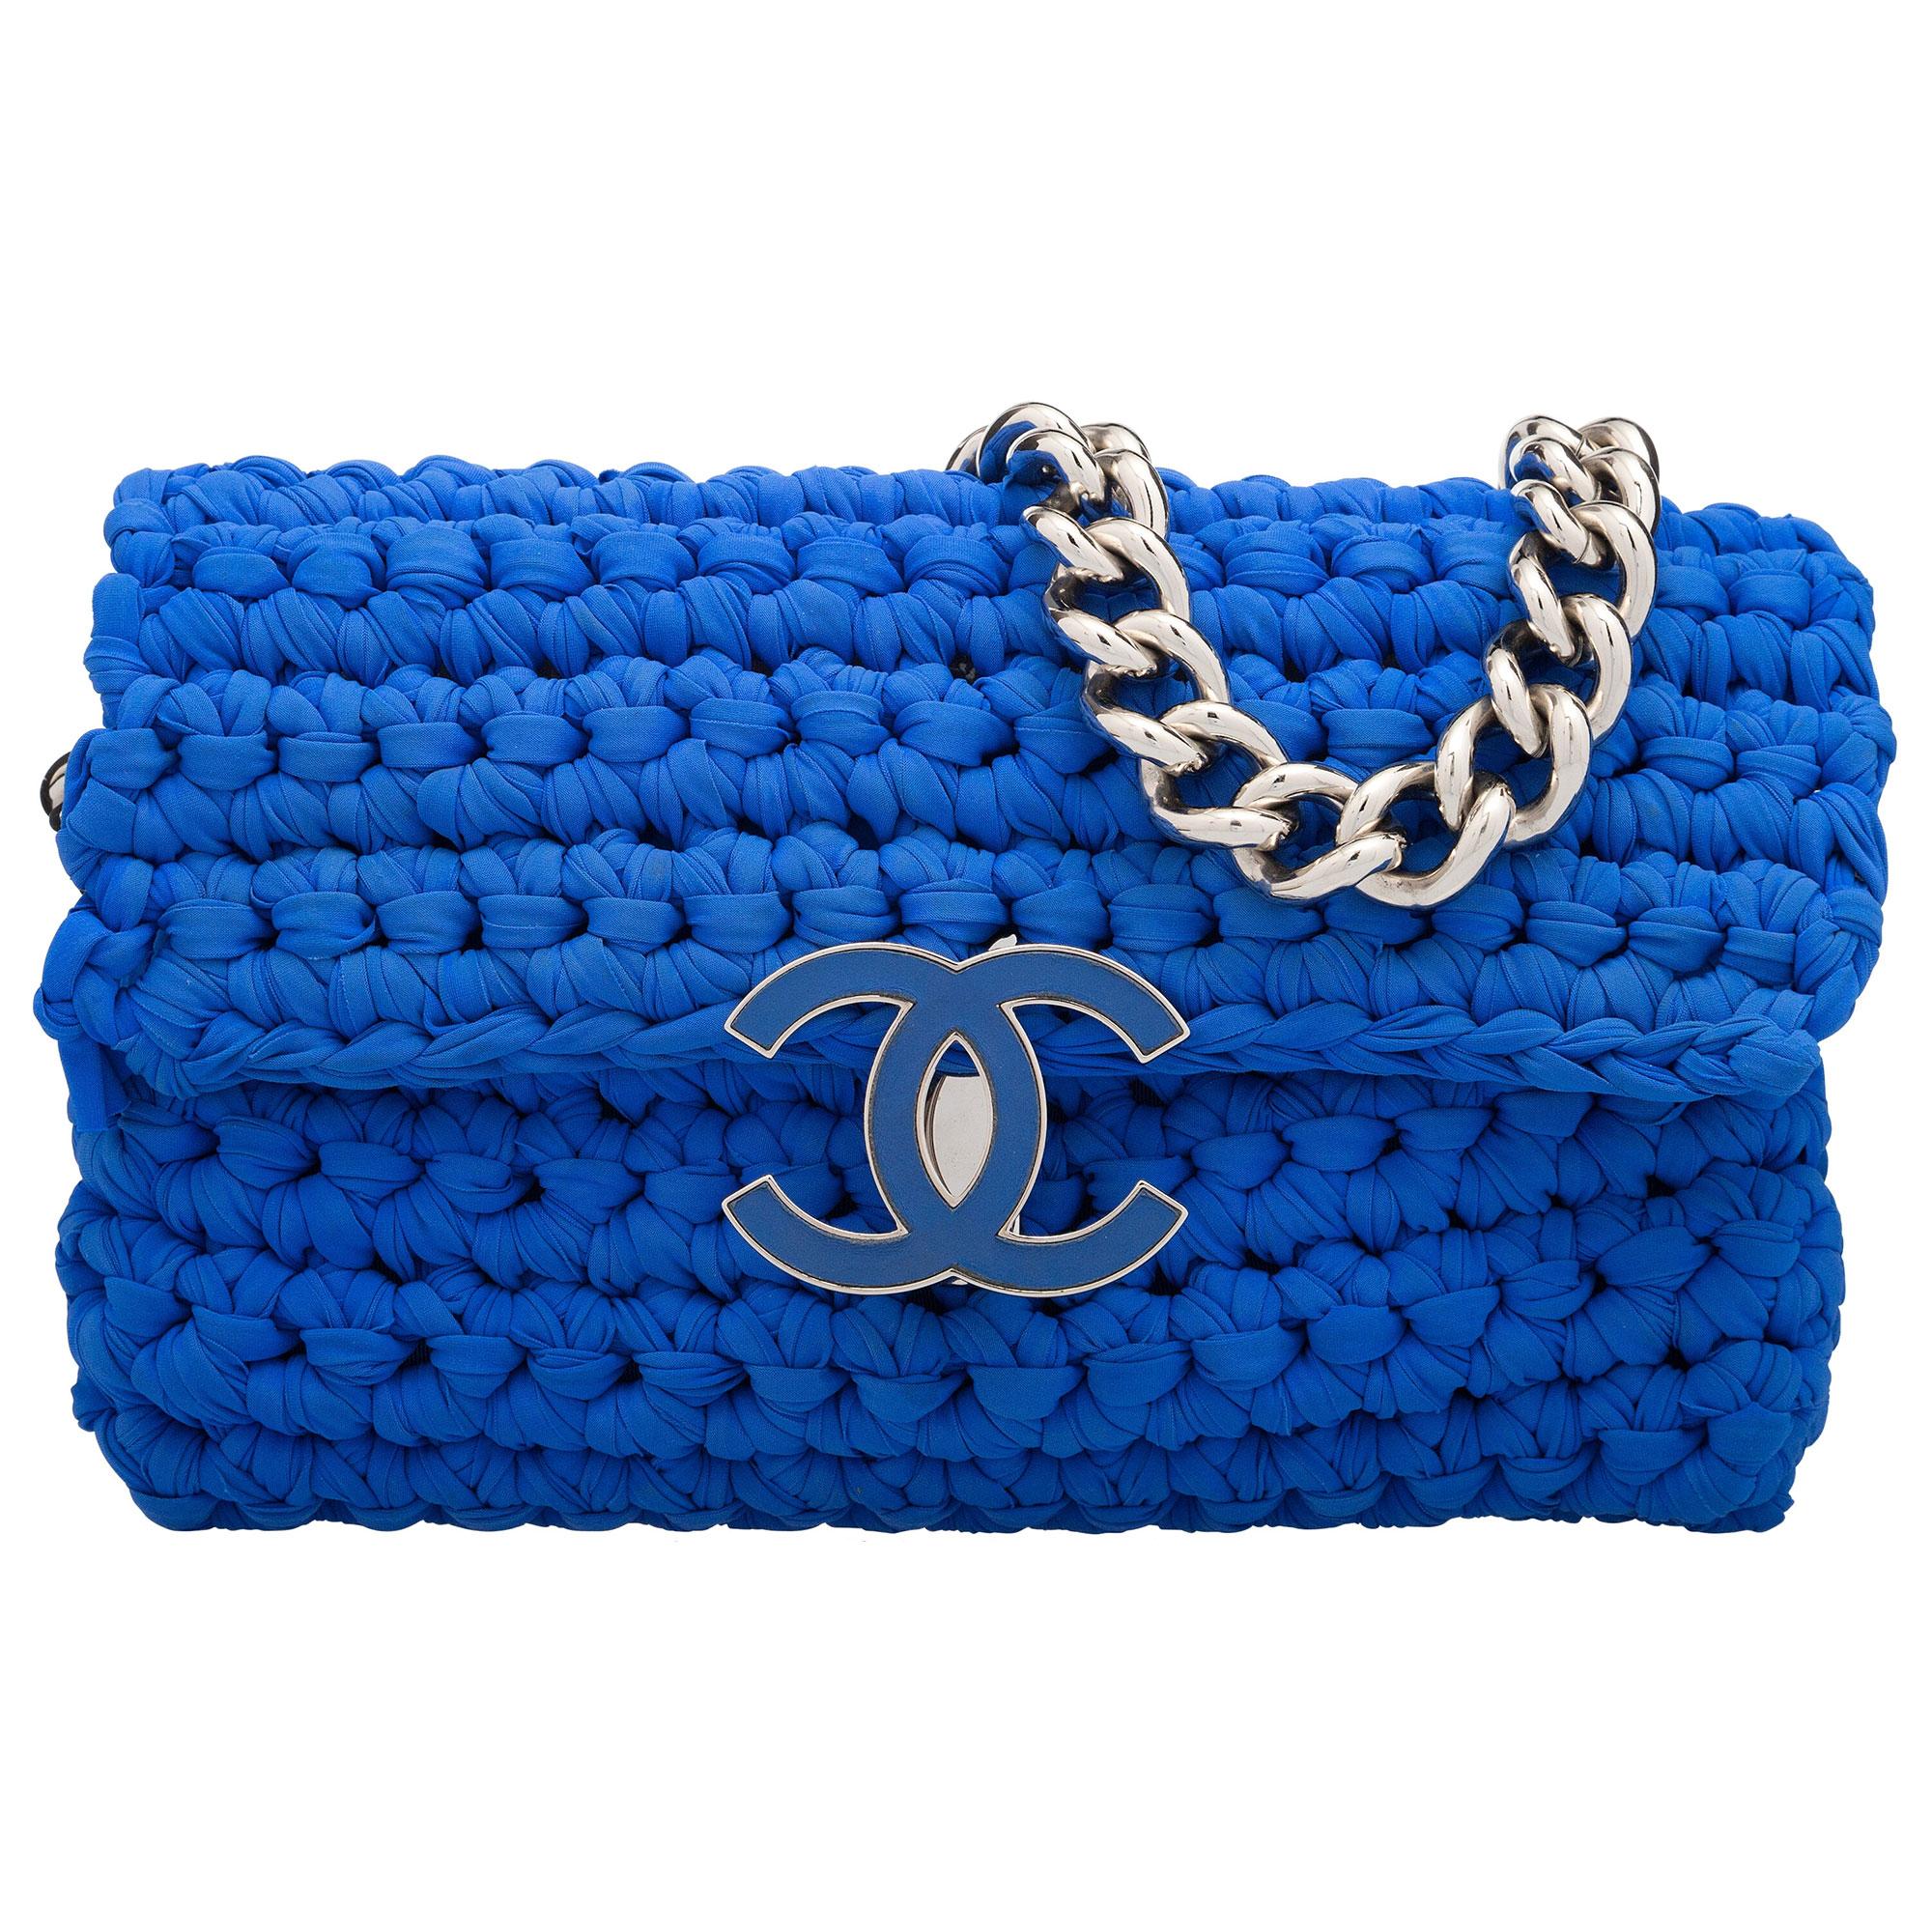 Chanel Classic Flap Electric Crochet Collectors Blue Cloth Shoulder Bag

Year: 2014
Silver hardware
Interior zipper pocket
Interior blue canvas lining
Strap drop 11”
6” H x 10” W x 2” D

Made in Italy